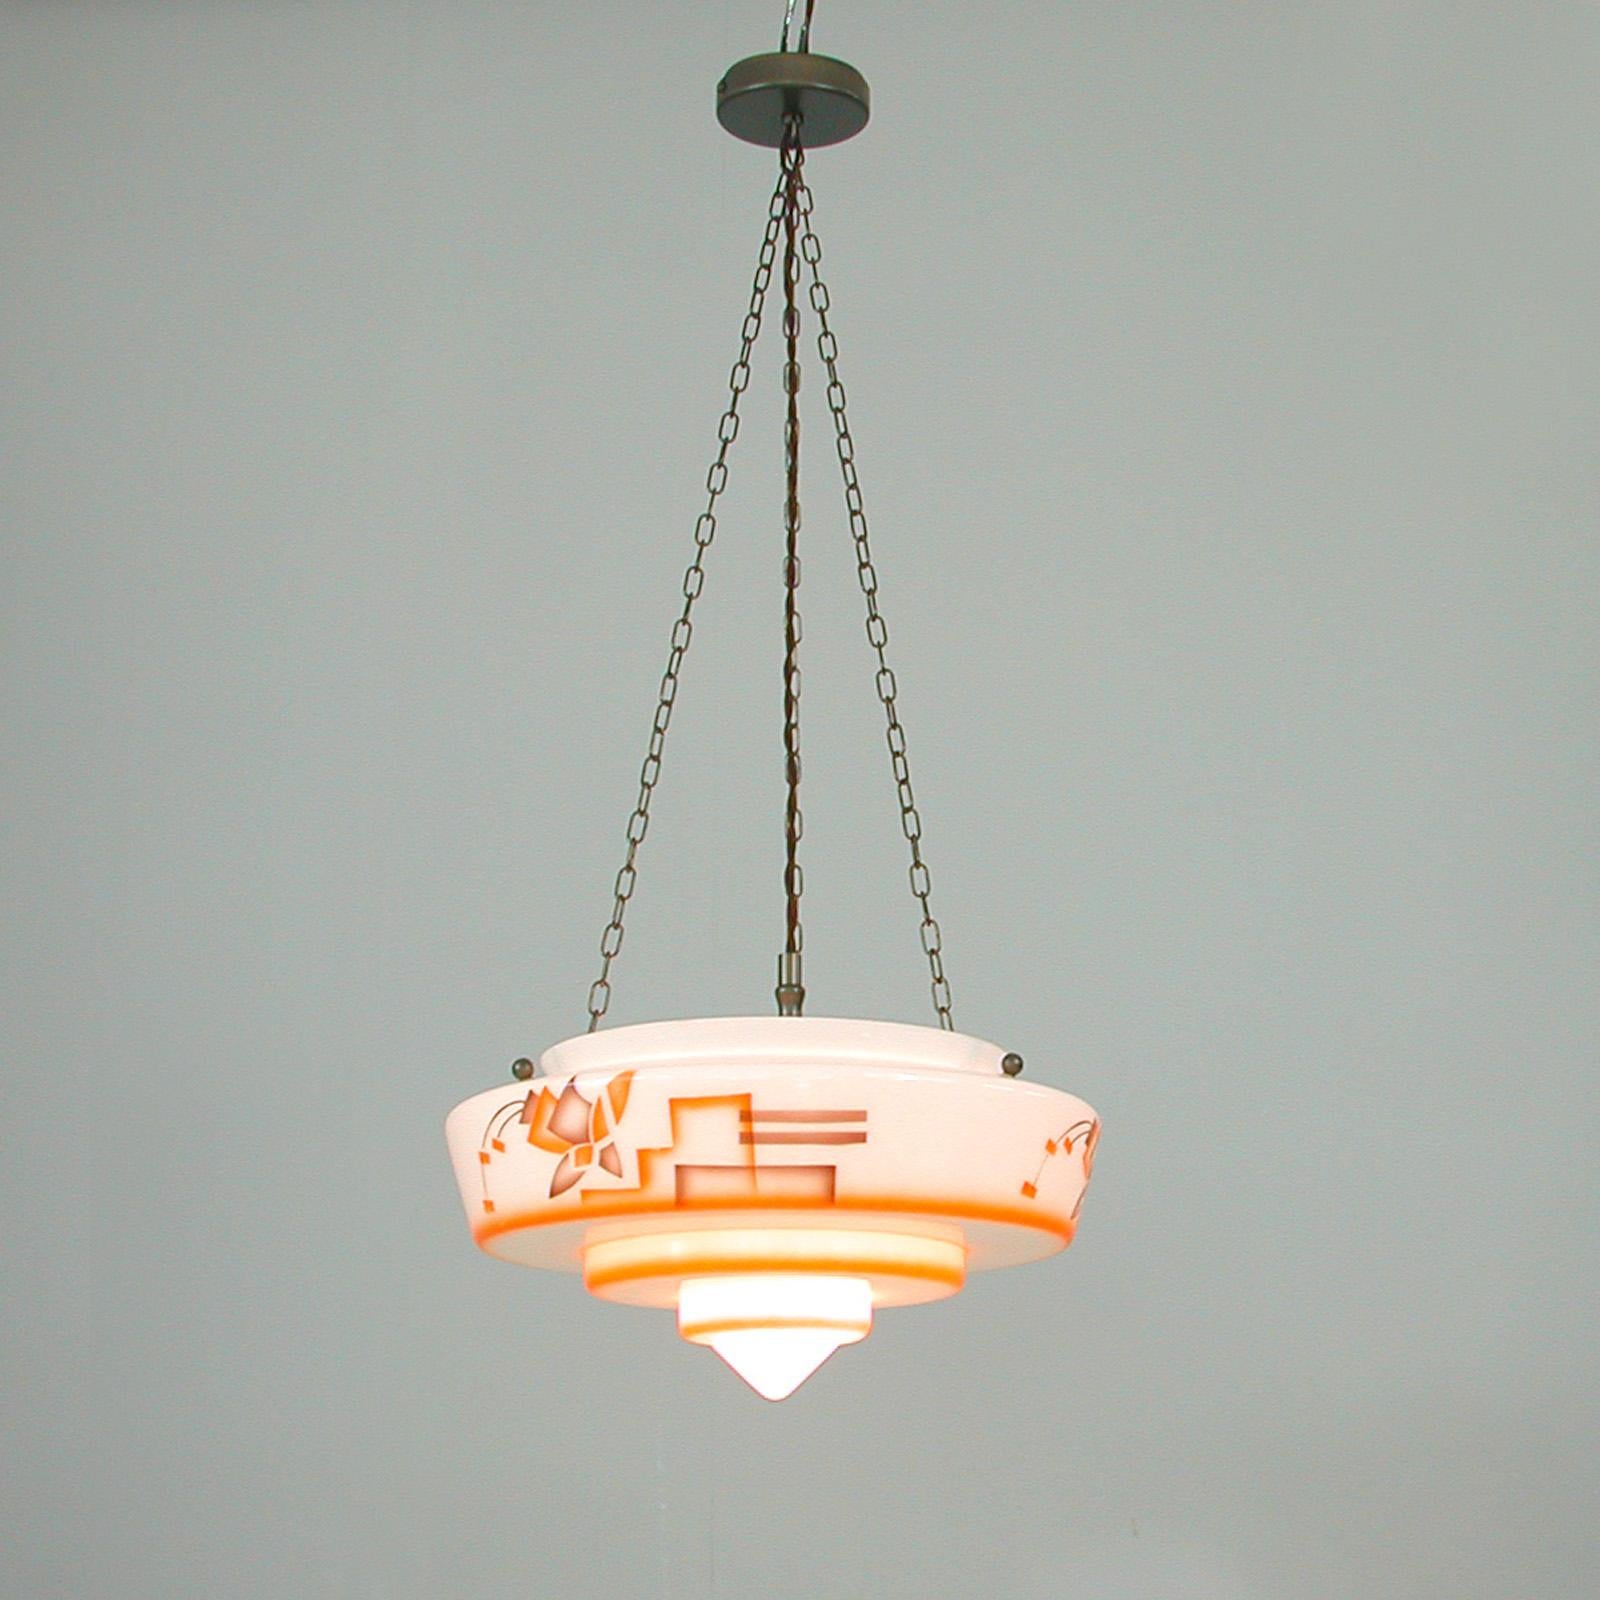 1930s ceiling light shades